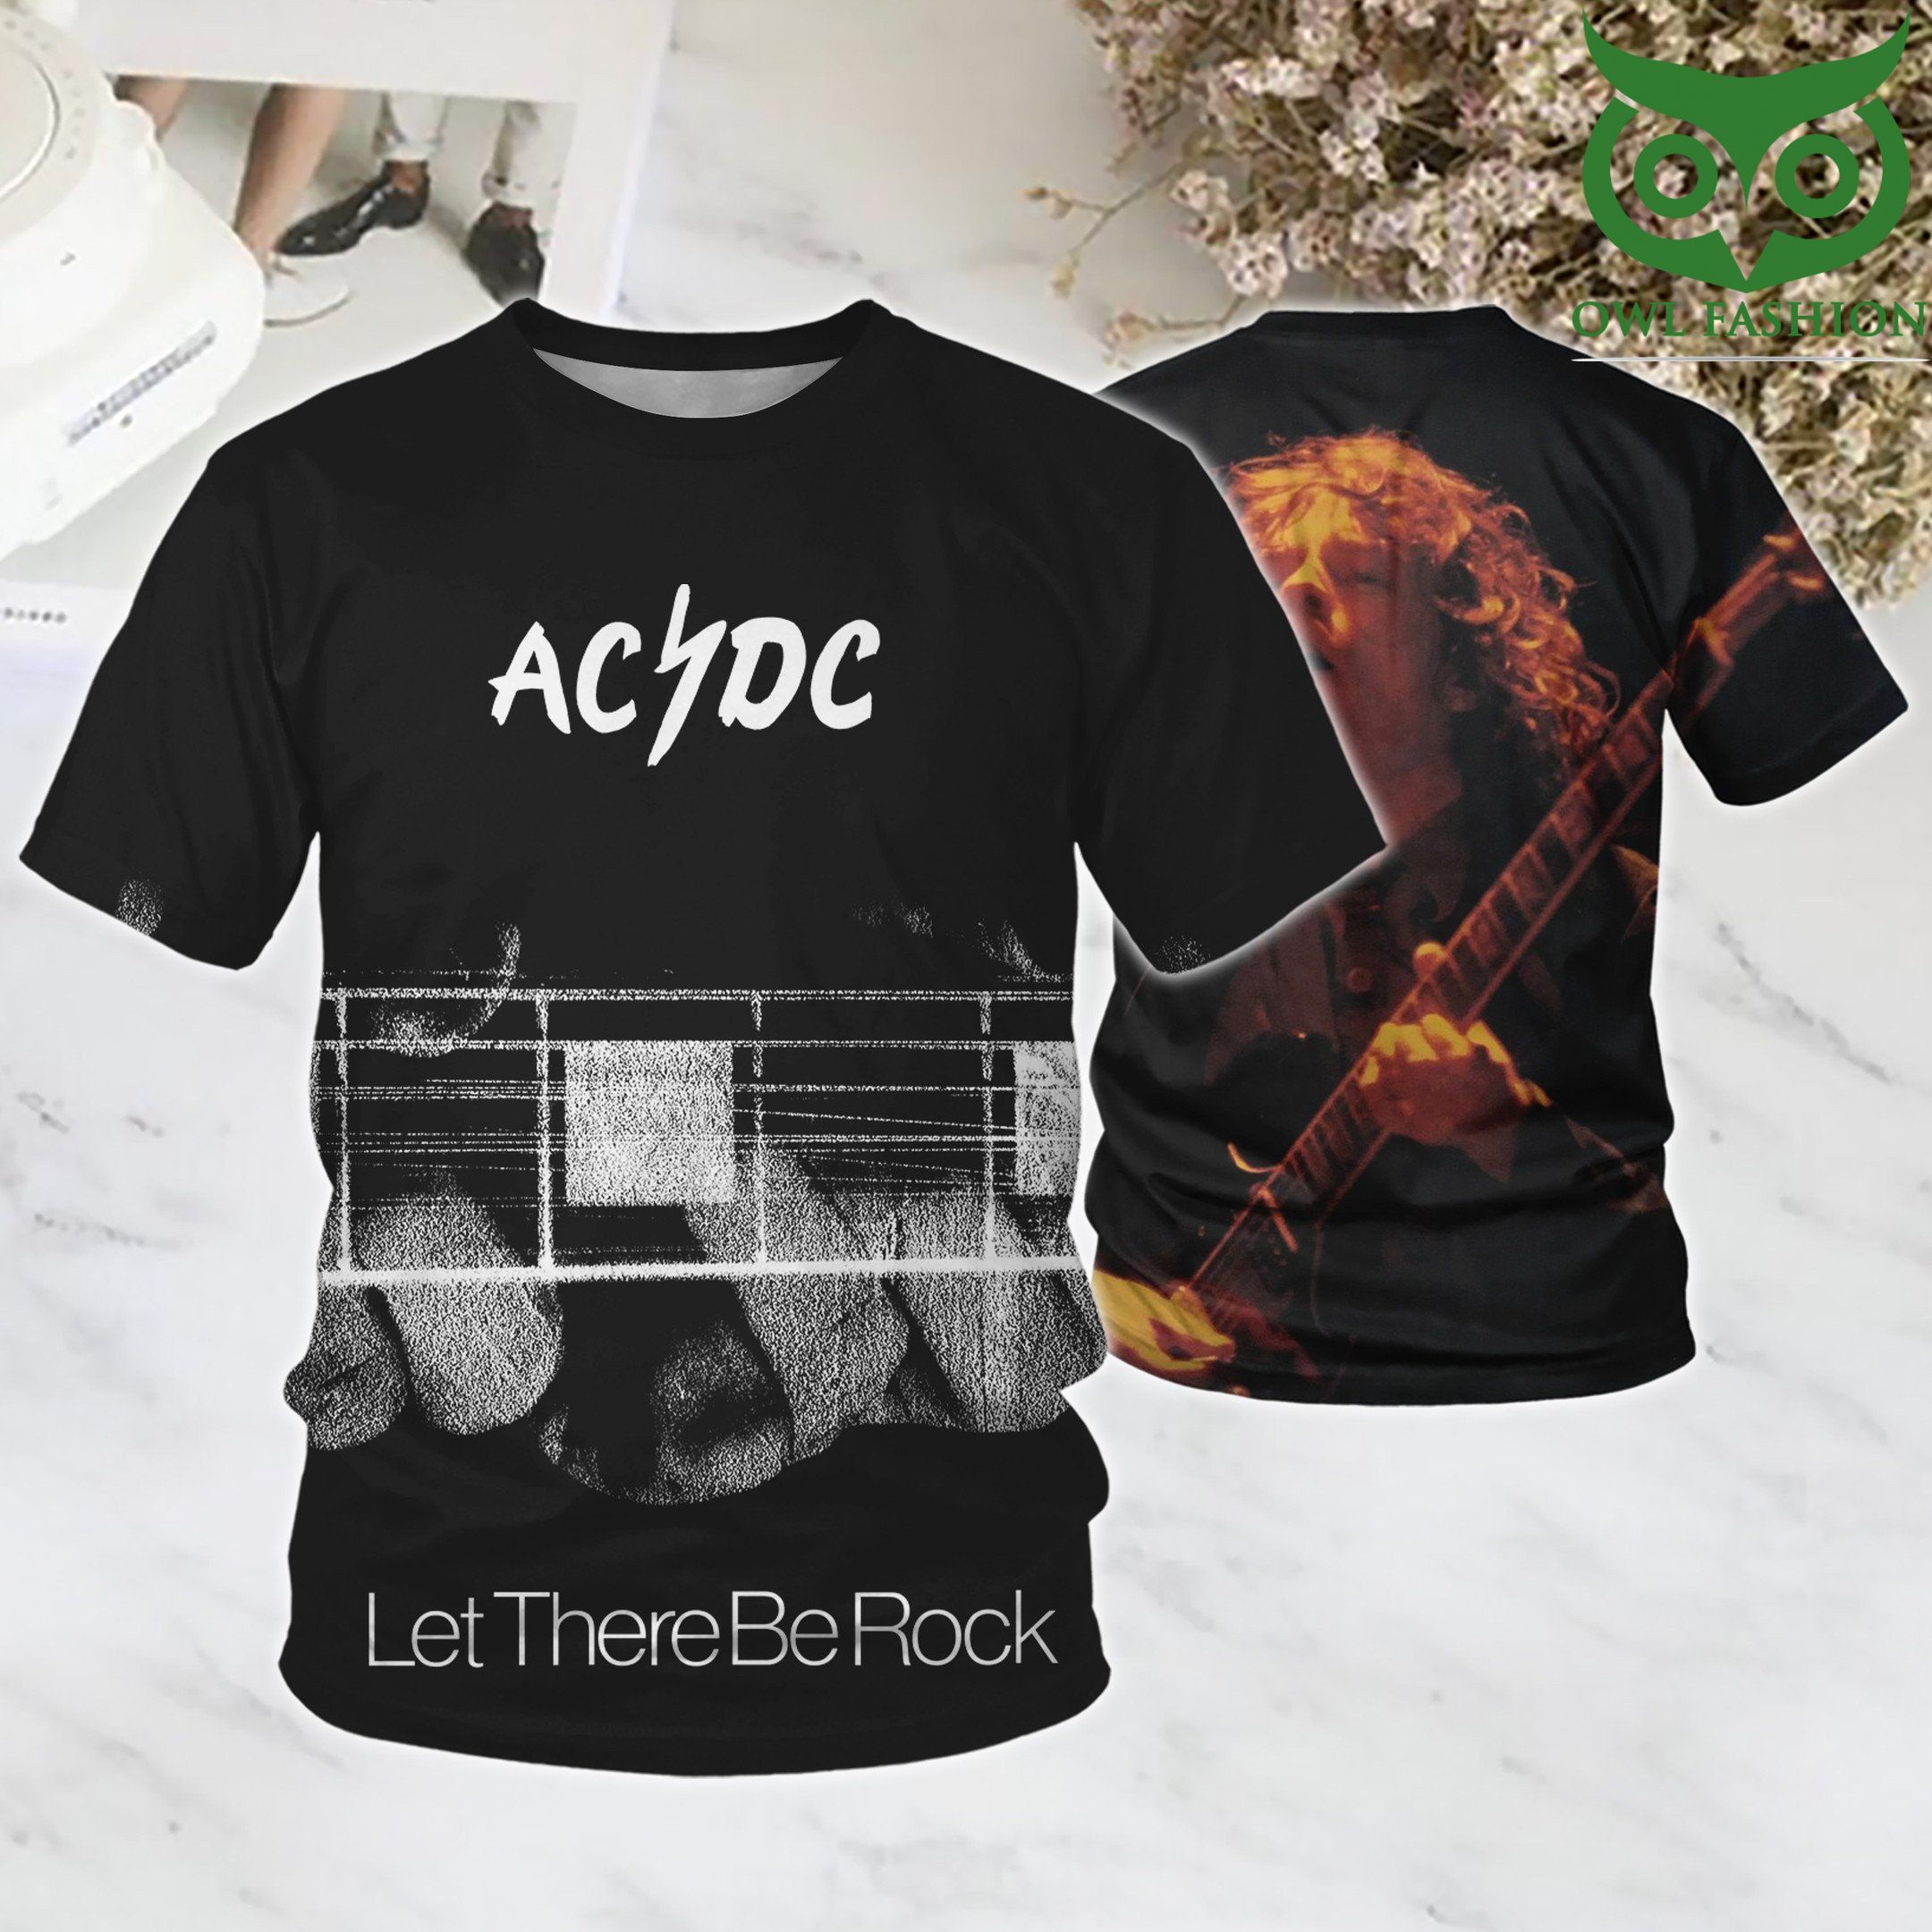 10 ACDC Let there be rock 3D T Shirt